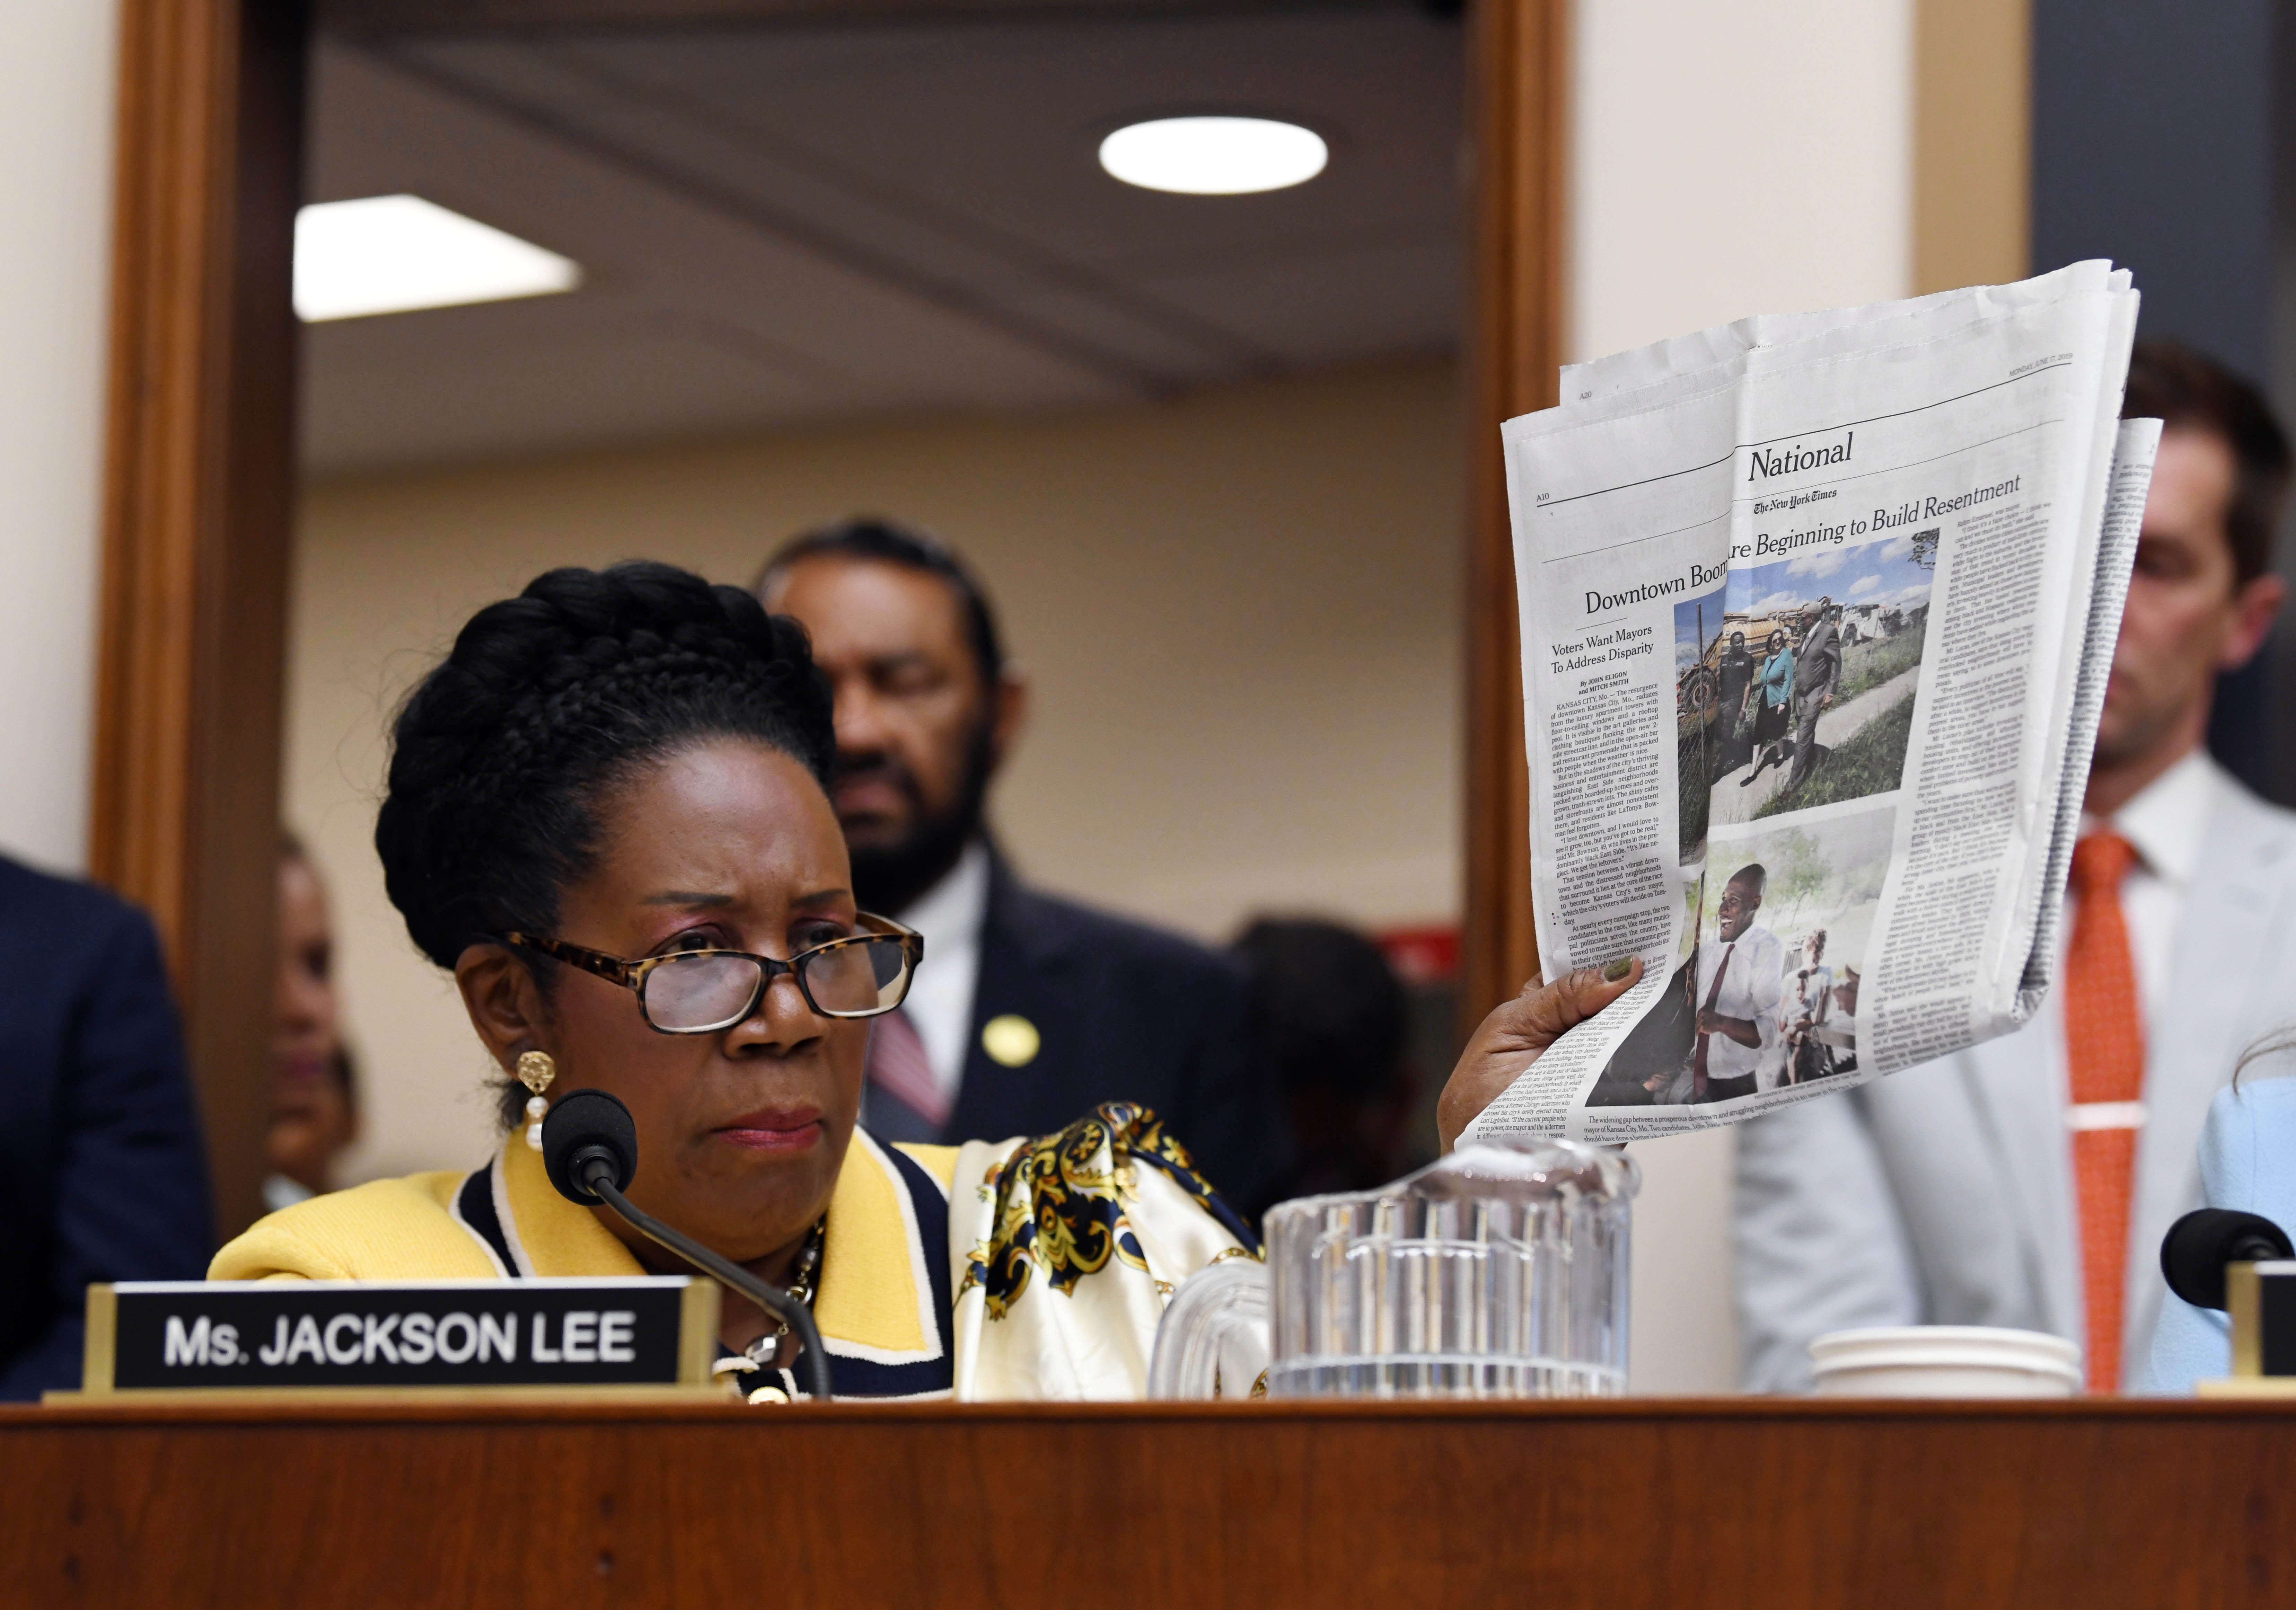 Texas Democratic U.S. Rep. Sheila Jackson Lee remembered as a 'fierce champion' for people